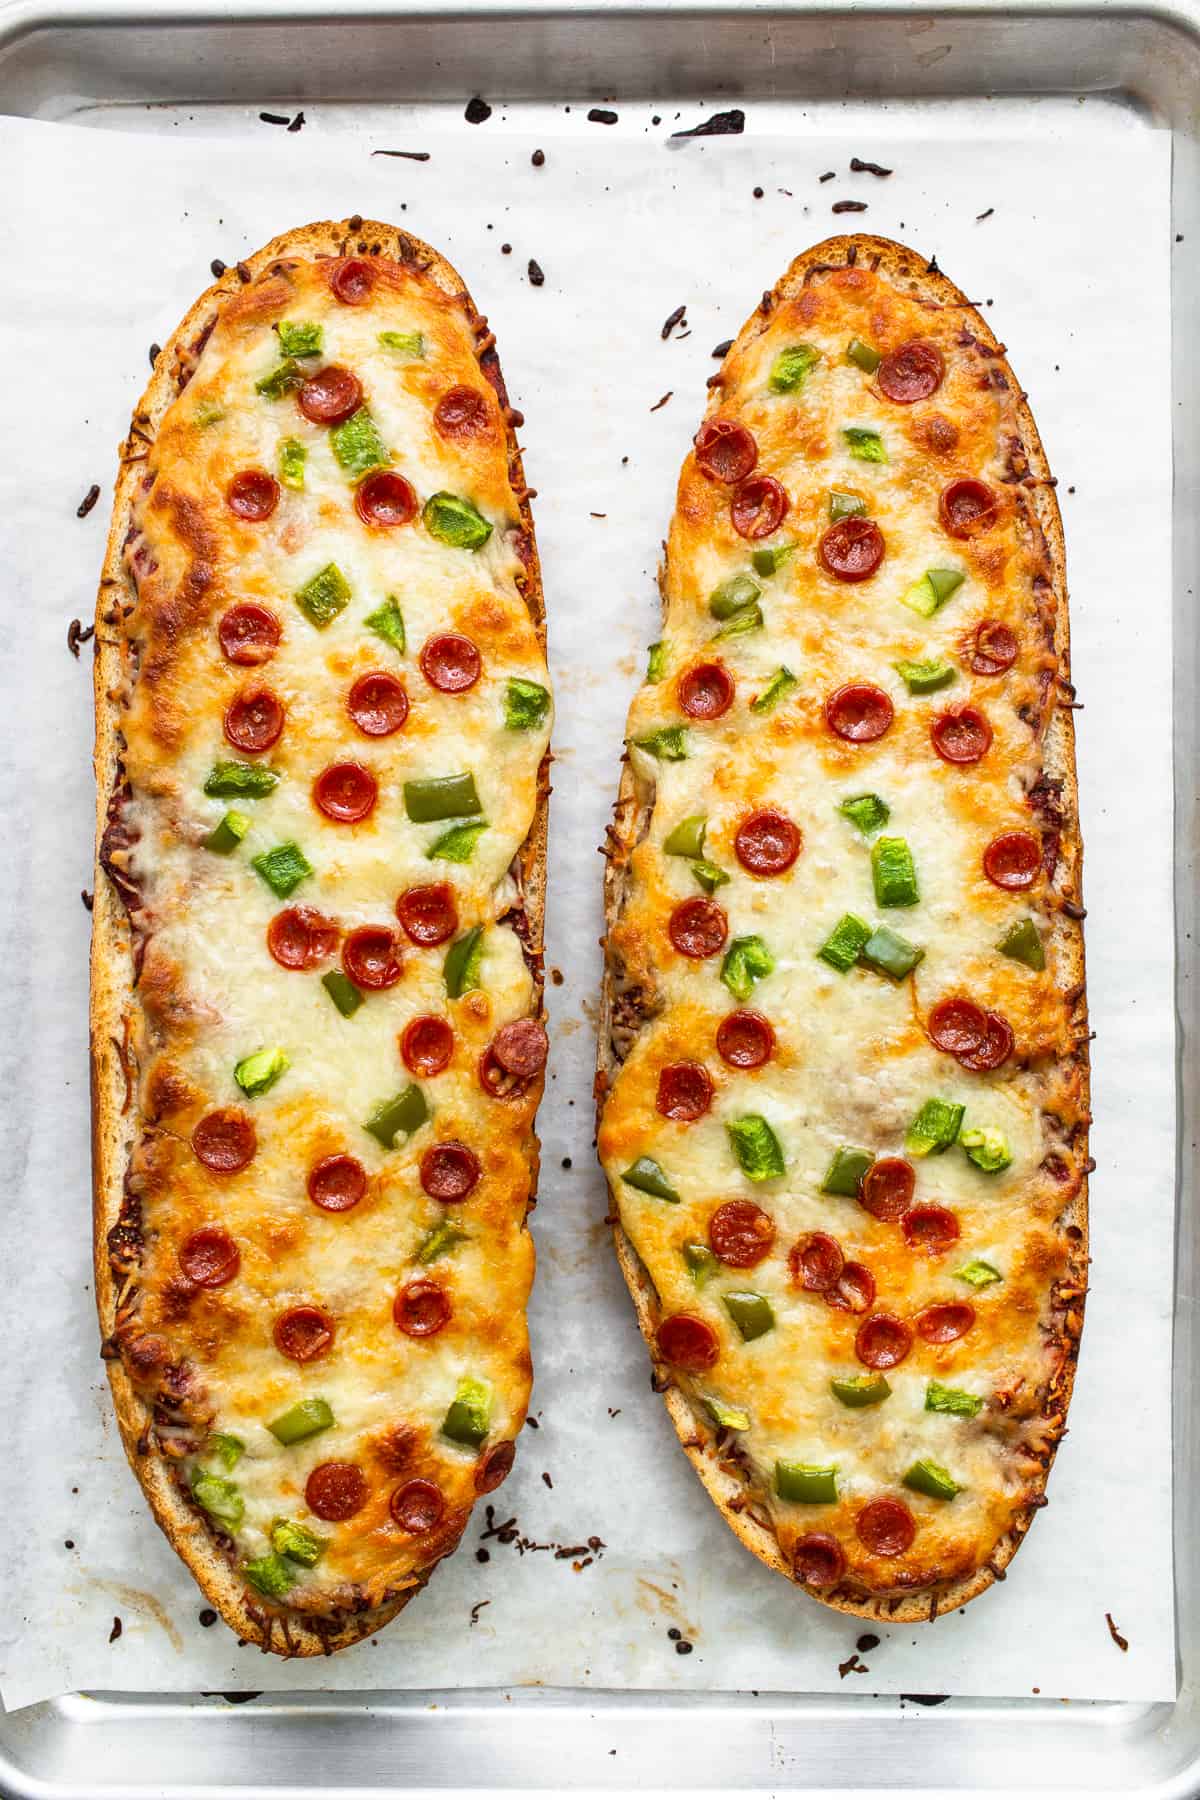 Cooked french bread pizza on a baking sheet.